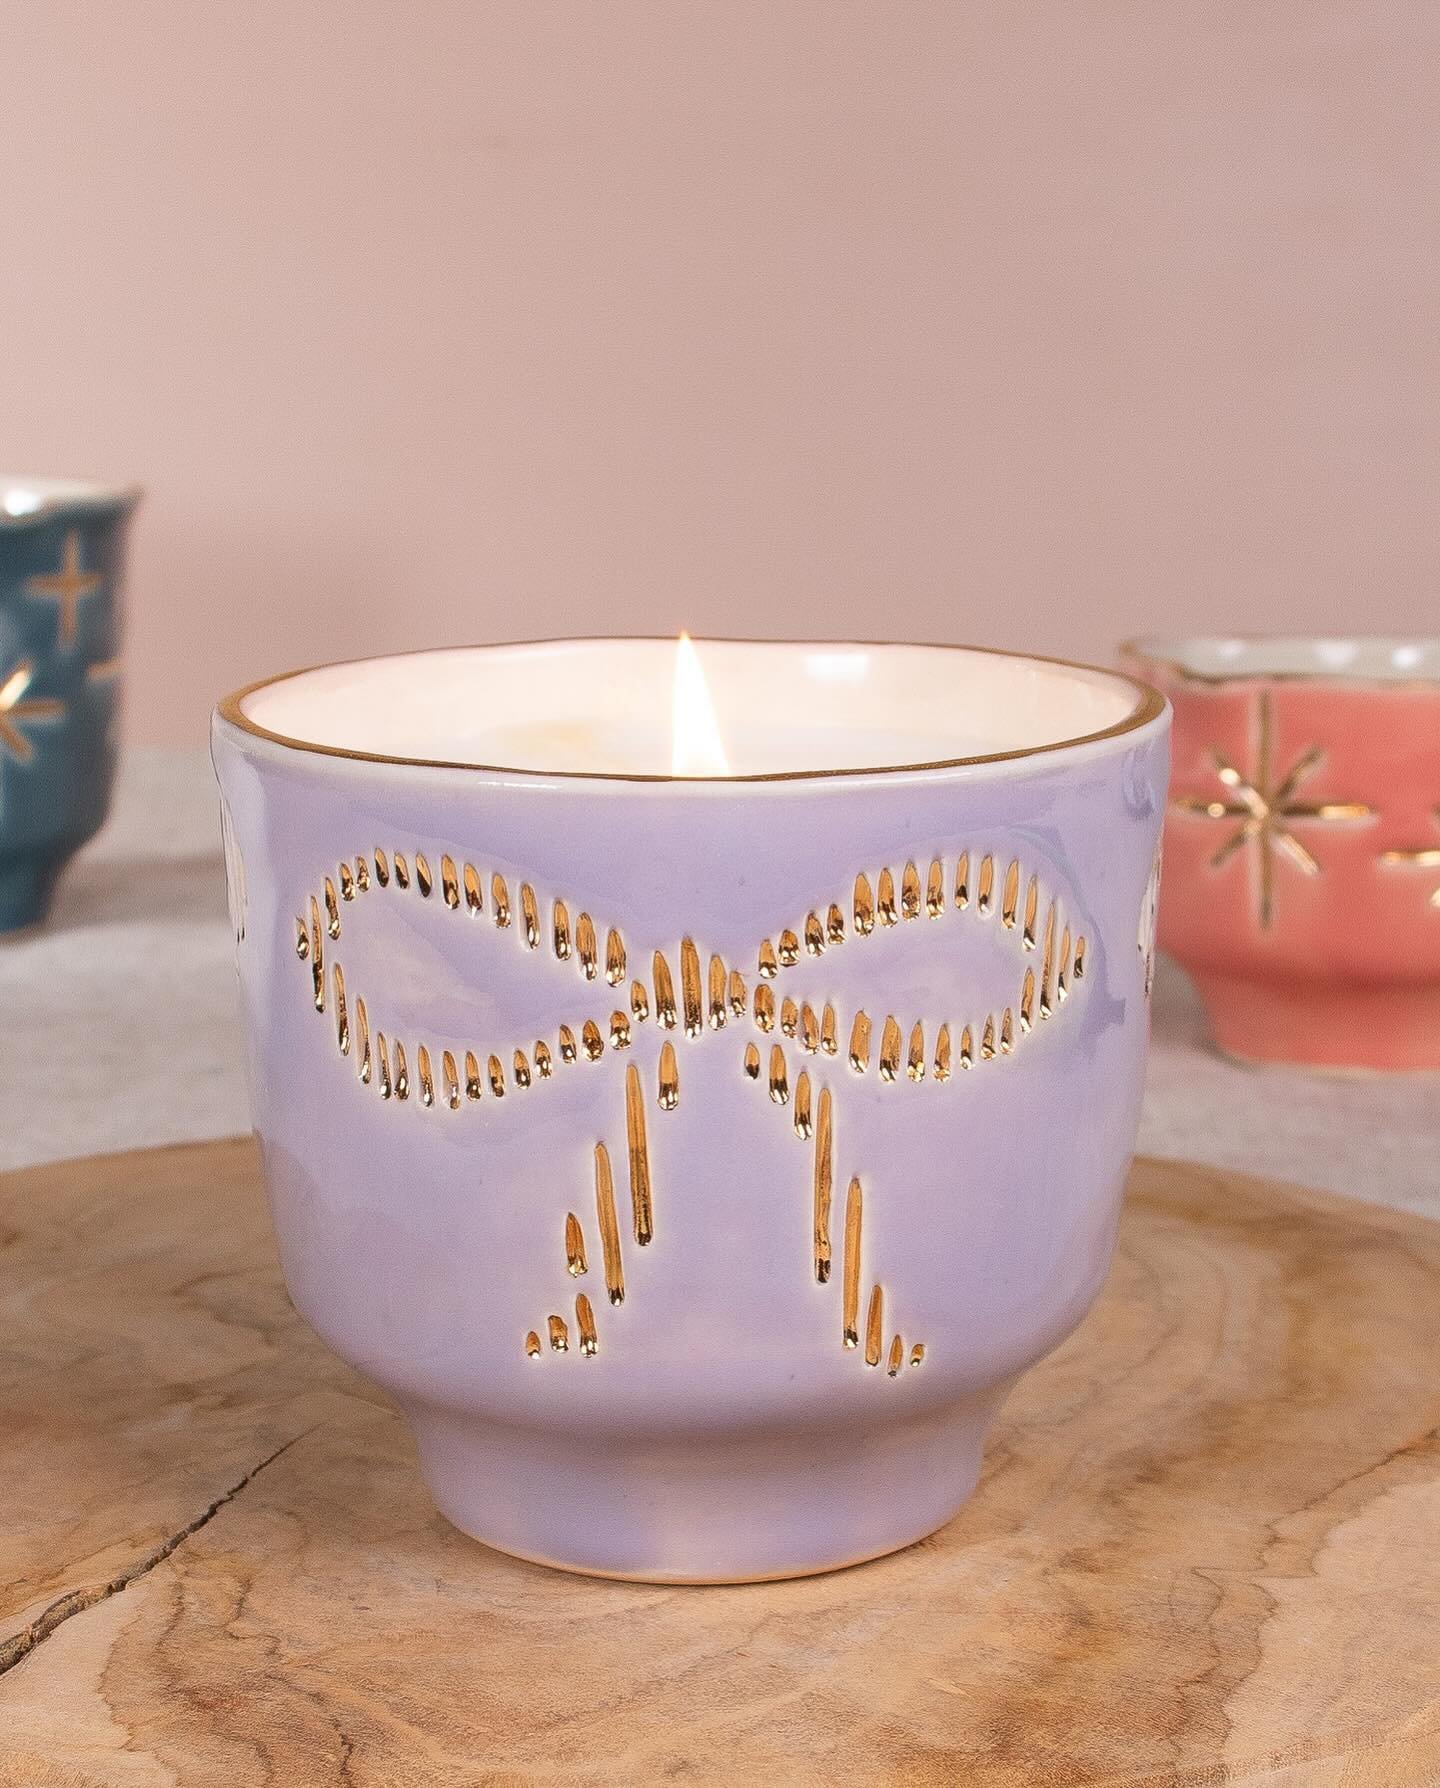 &lowast; pouring this candle today in Opulent Orchid 😊️💜(luxe florals and sea salt), sharing my number one spot for favorite spring/summer candle scent alongside Citrus Cabana (tropical sugared citrus).

More candles on the way, also working on add